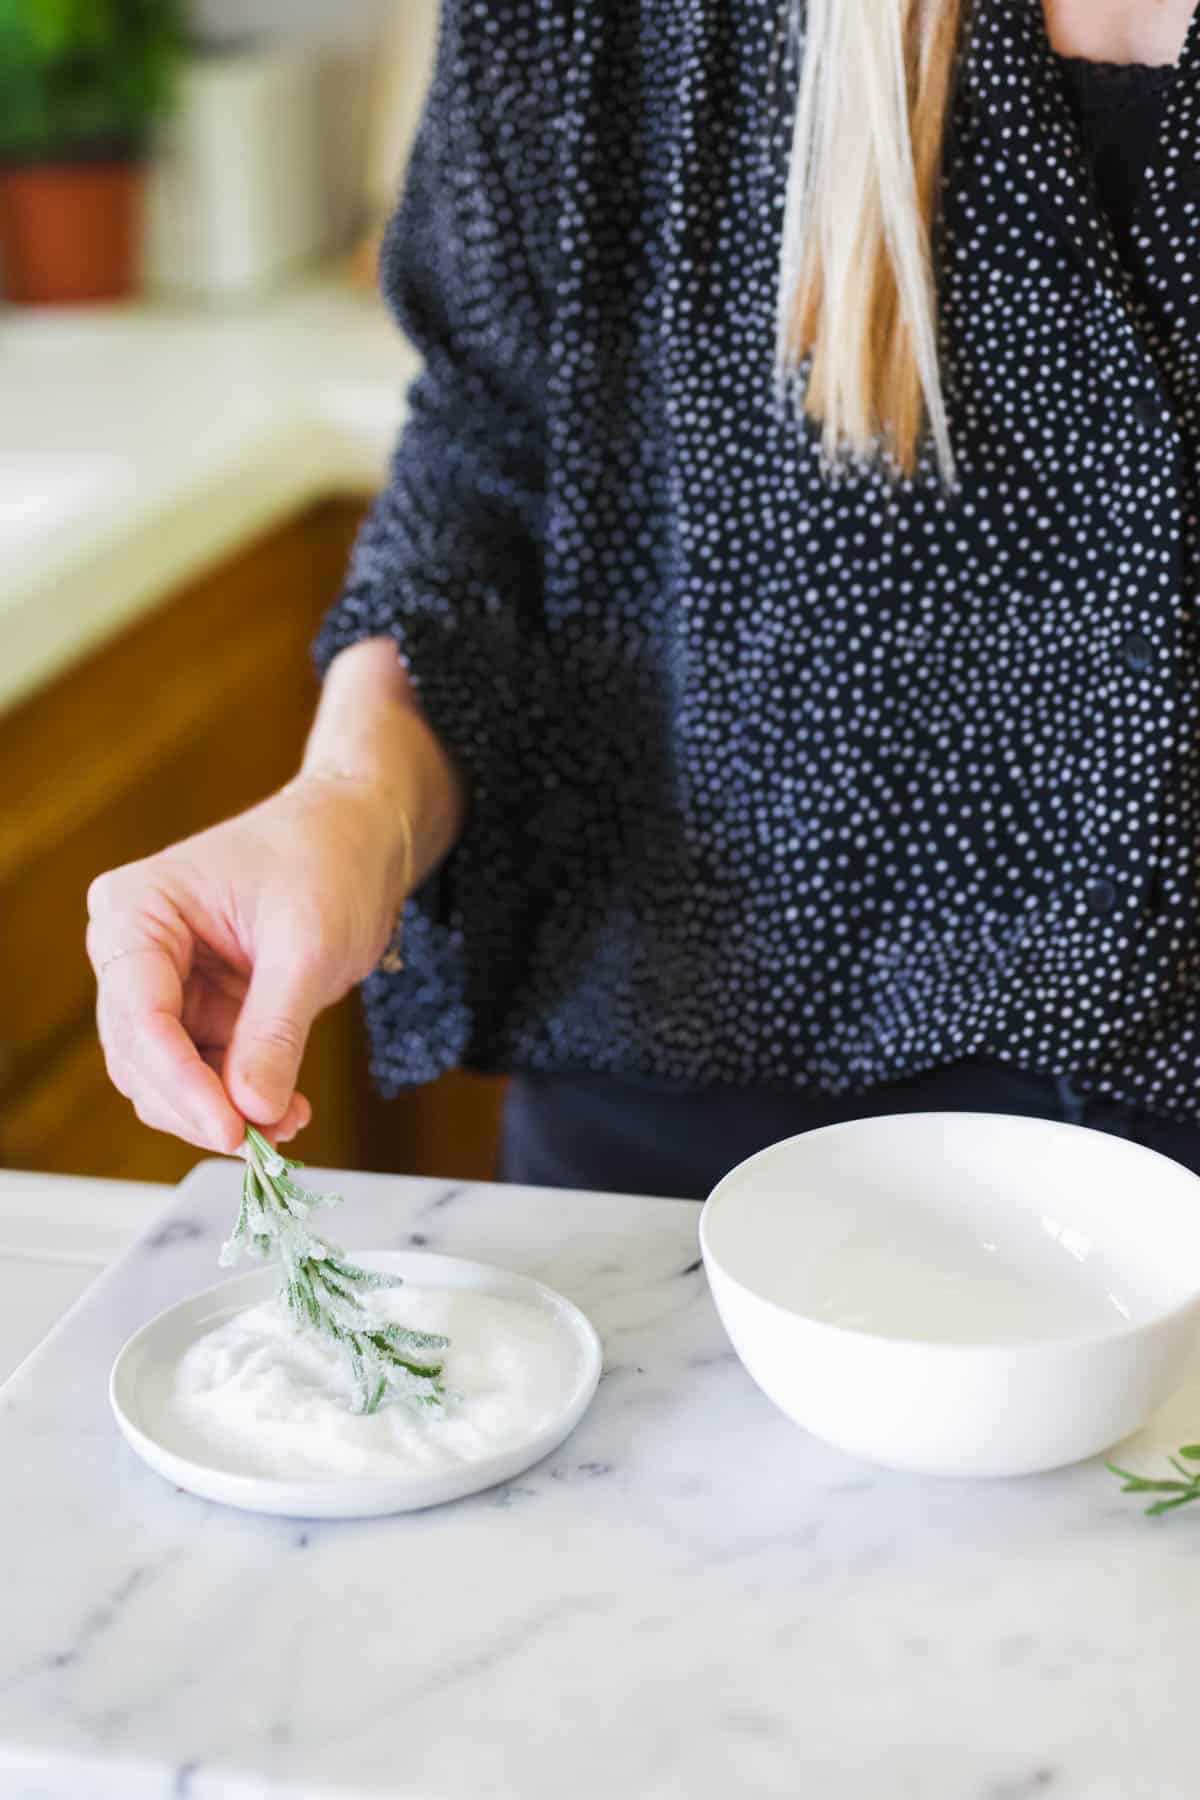 Dipping rosemary sprig into white granulated sugar.